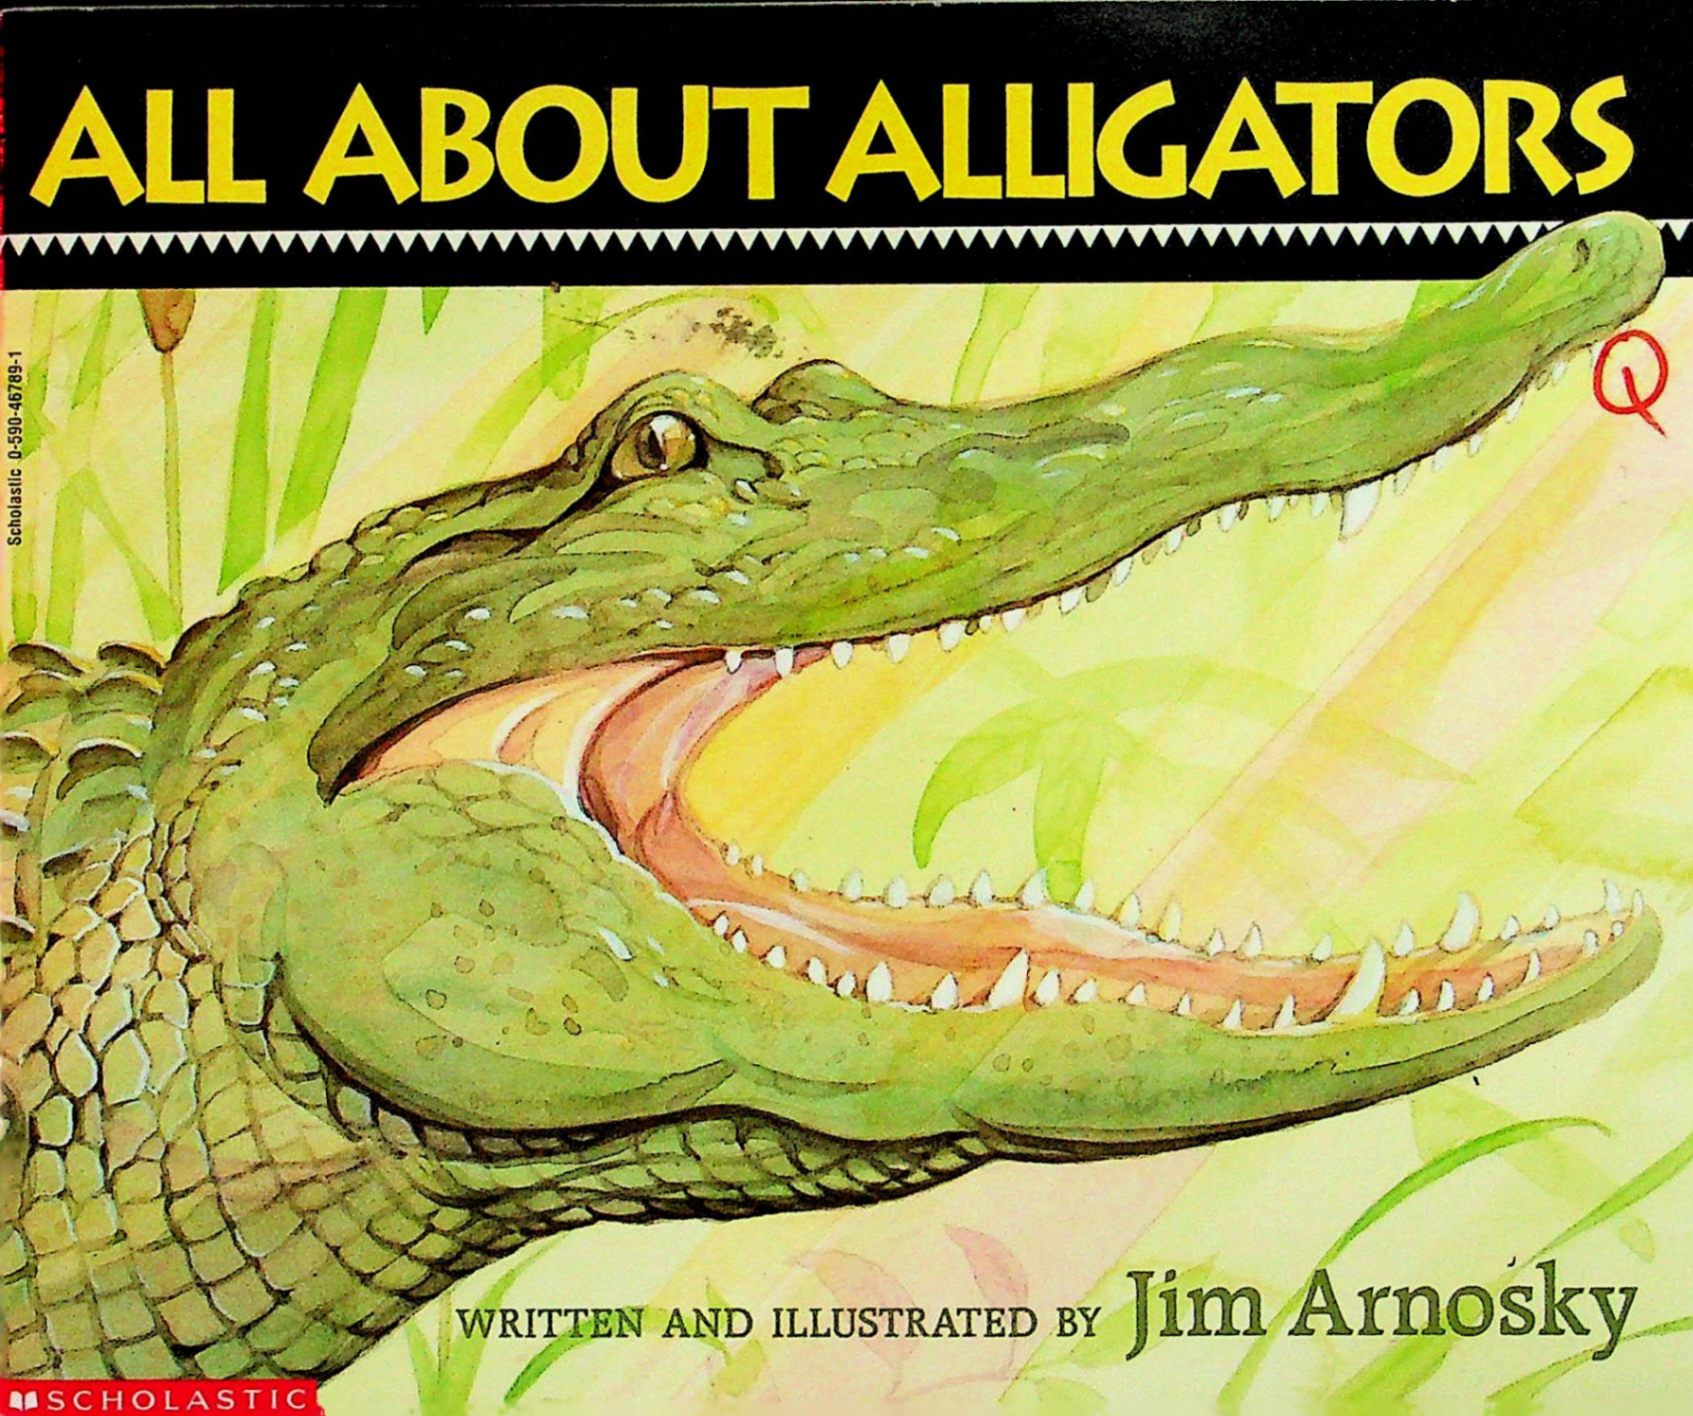 all about alligators all about series_短吻鳄和鳄鱼_动物_儿童图书